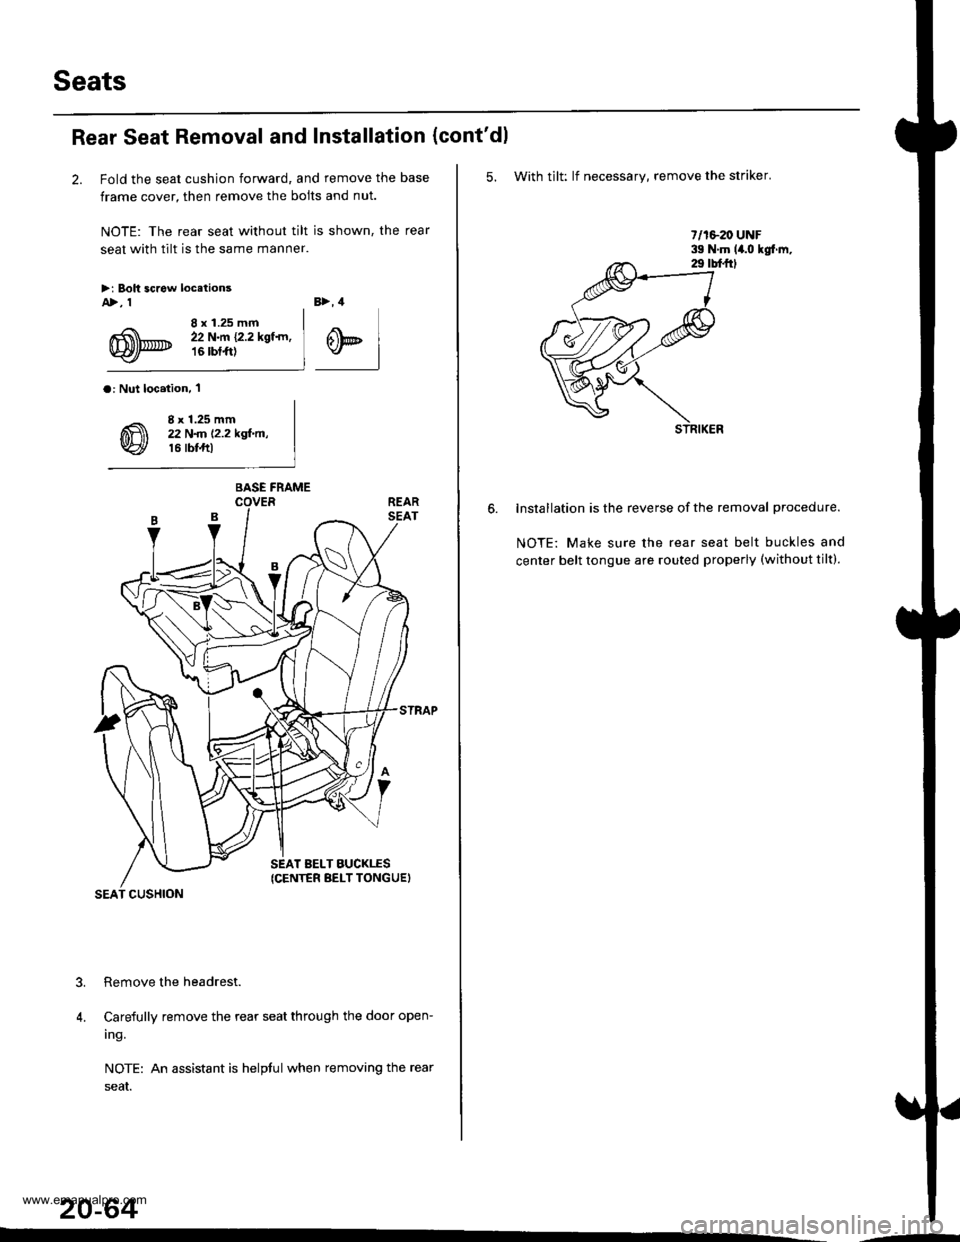 HONDA CR-V 1999 RD1-RD3 / 1.G Workshop Manual 
Seats
Rear Seat Removal and Installation
2. Fold the seat cushion forward, and remove the base
frame cover, then remove the bolts and nut.
NOTE: The rear seat without tilt is shown, the rear
seat wit